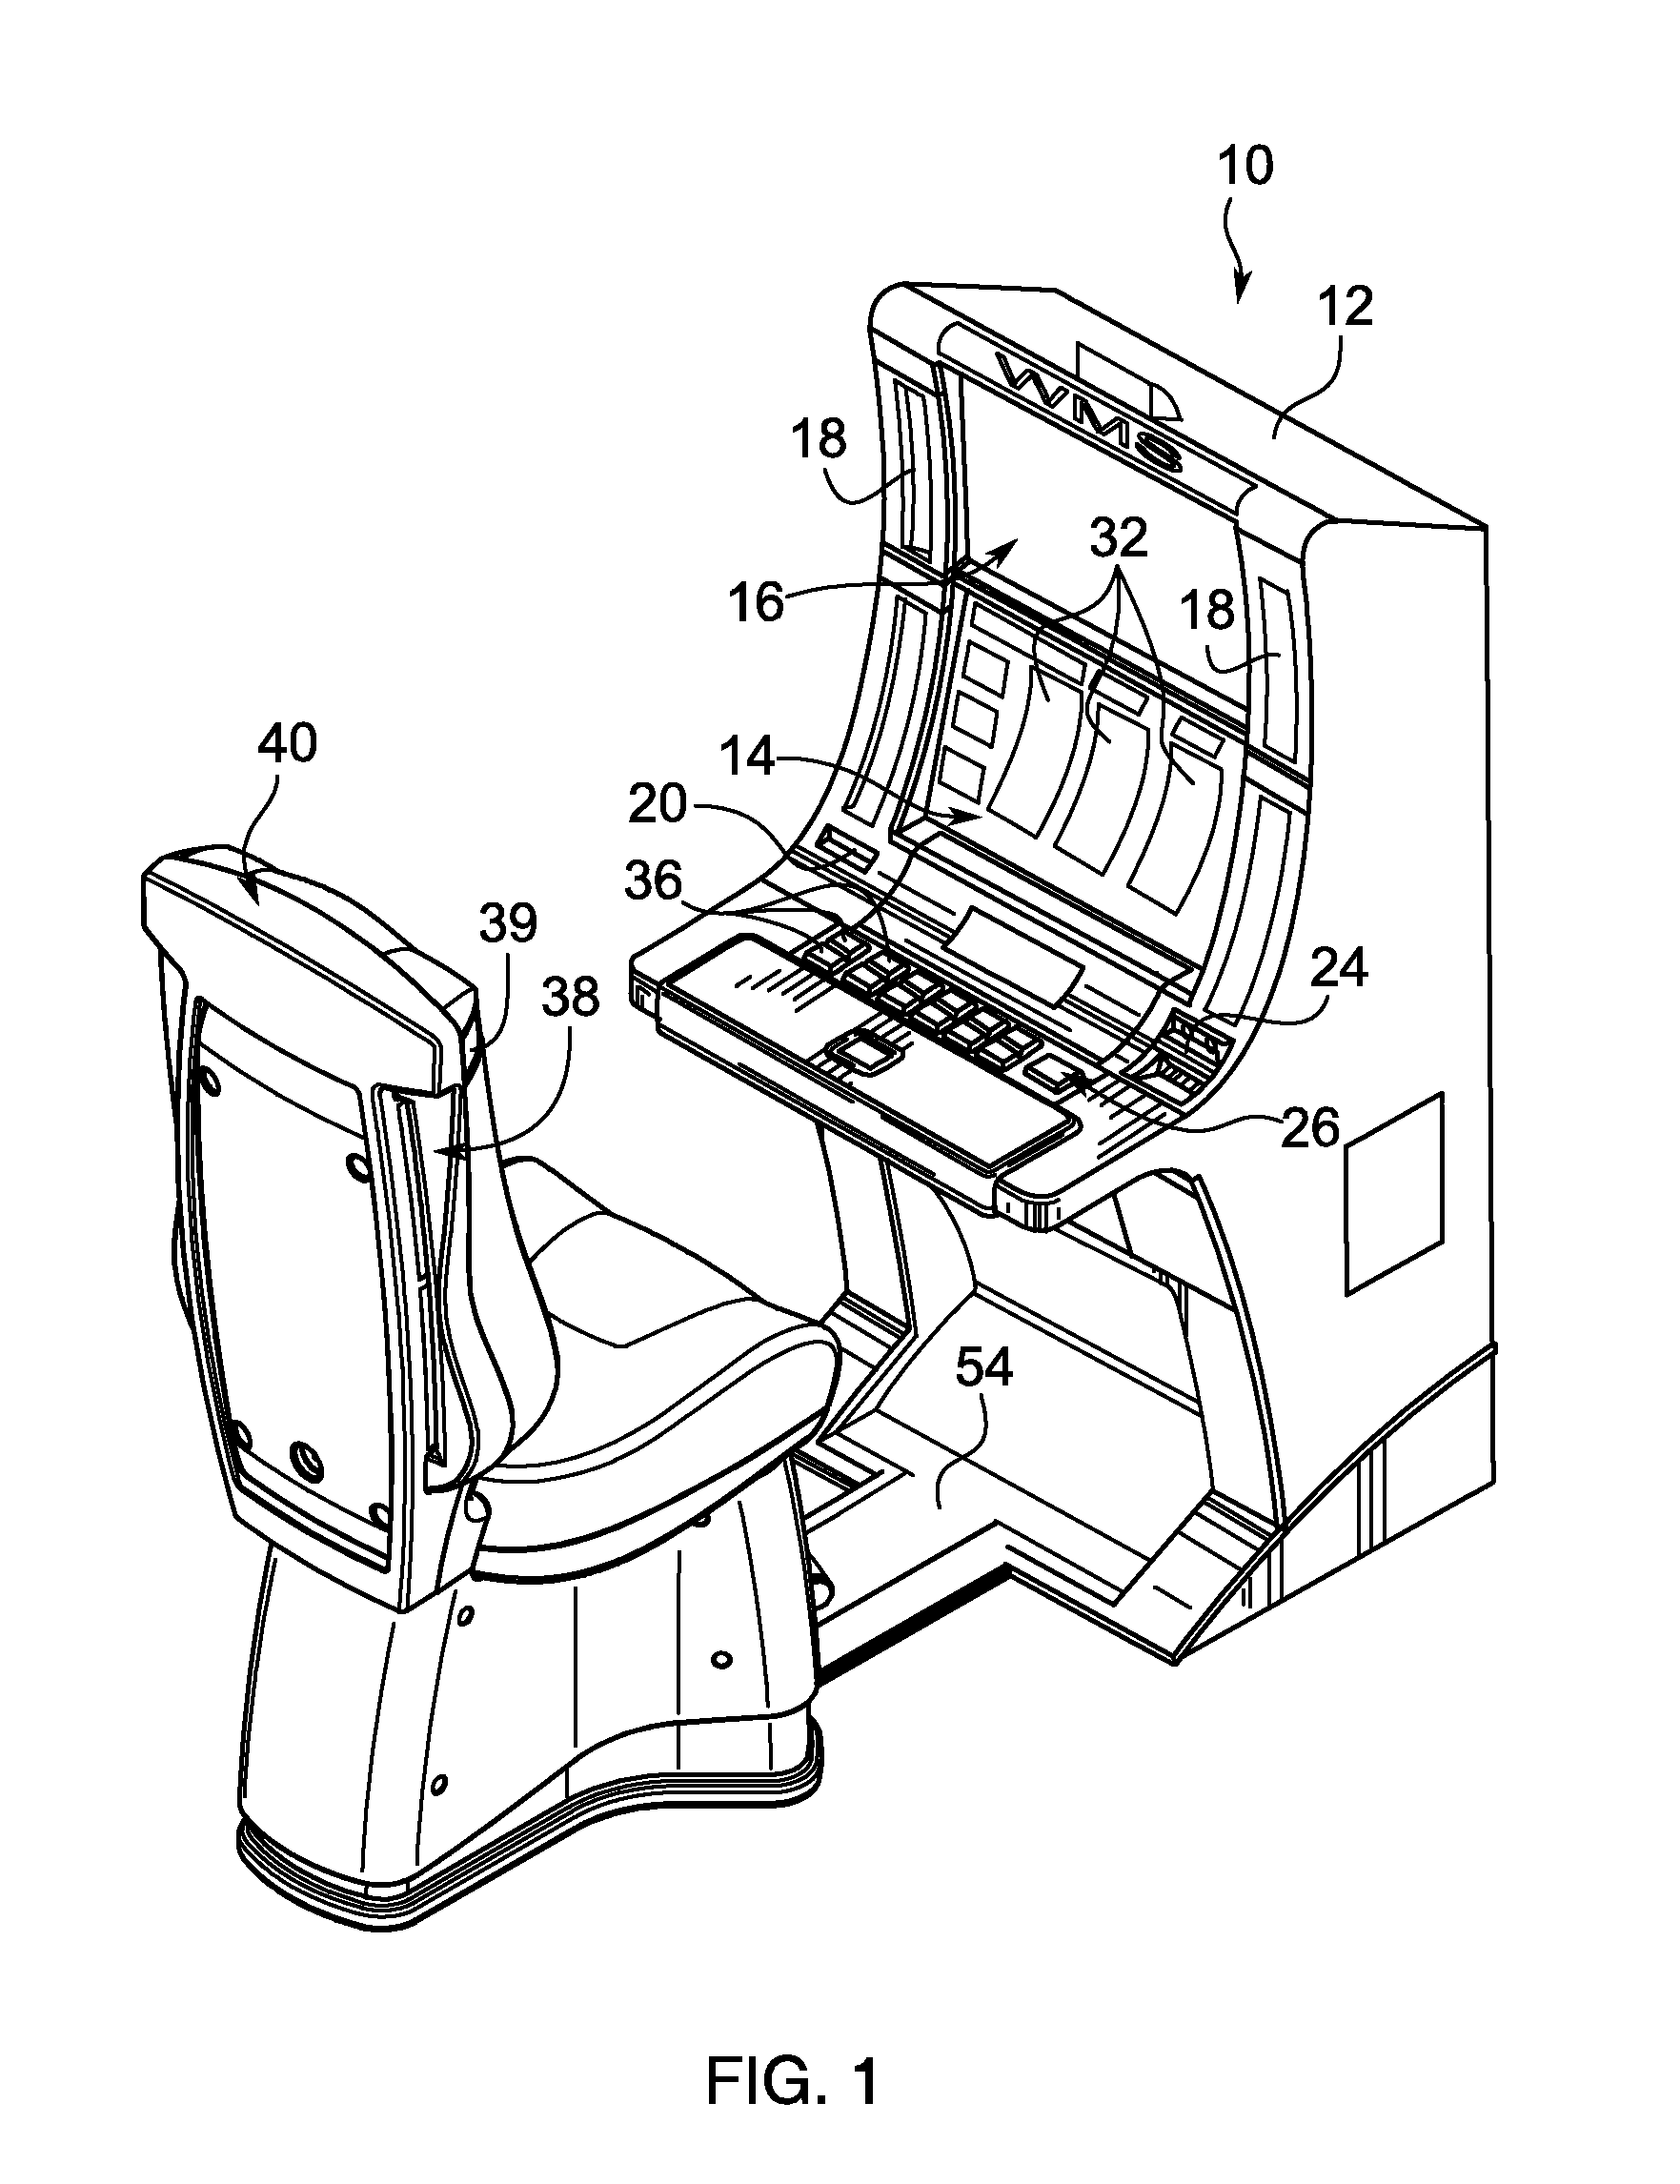 Wagering Game Systems, Wagering Gaming Machines, And Wagering Gaming Chairs Having Haptic And Thermal Feedback